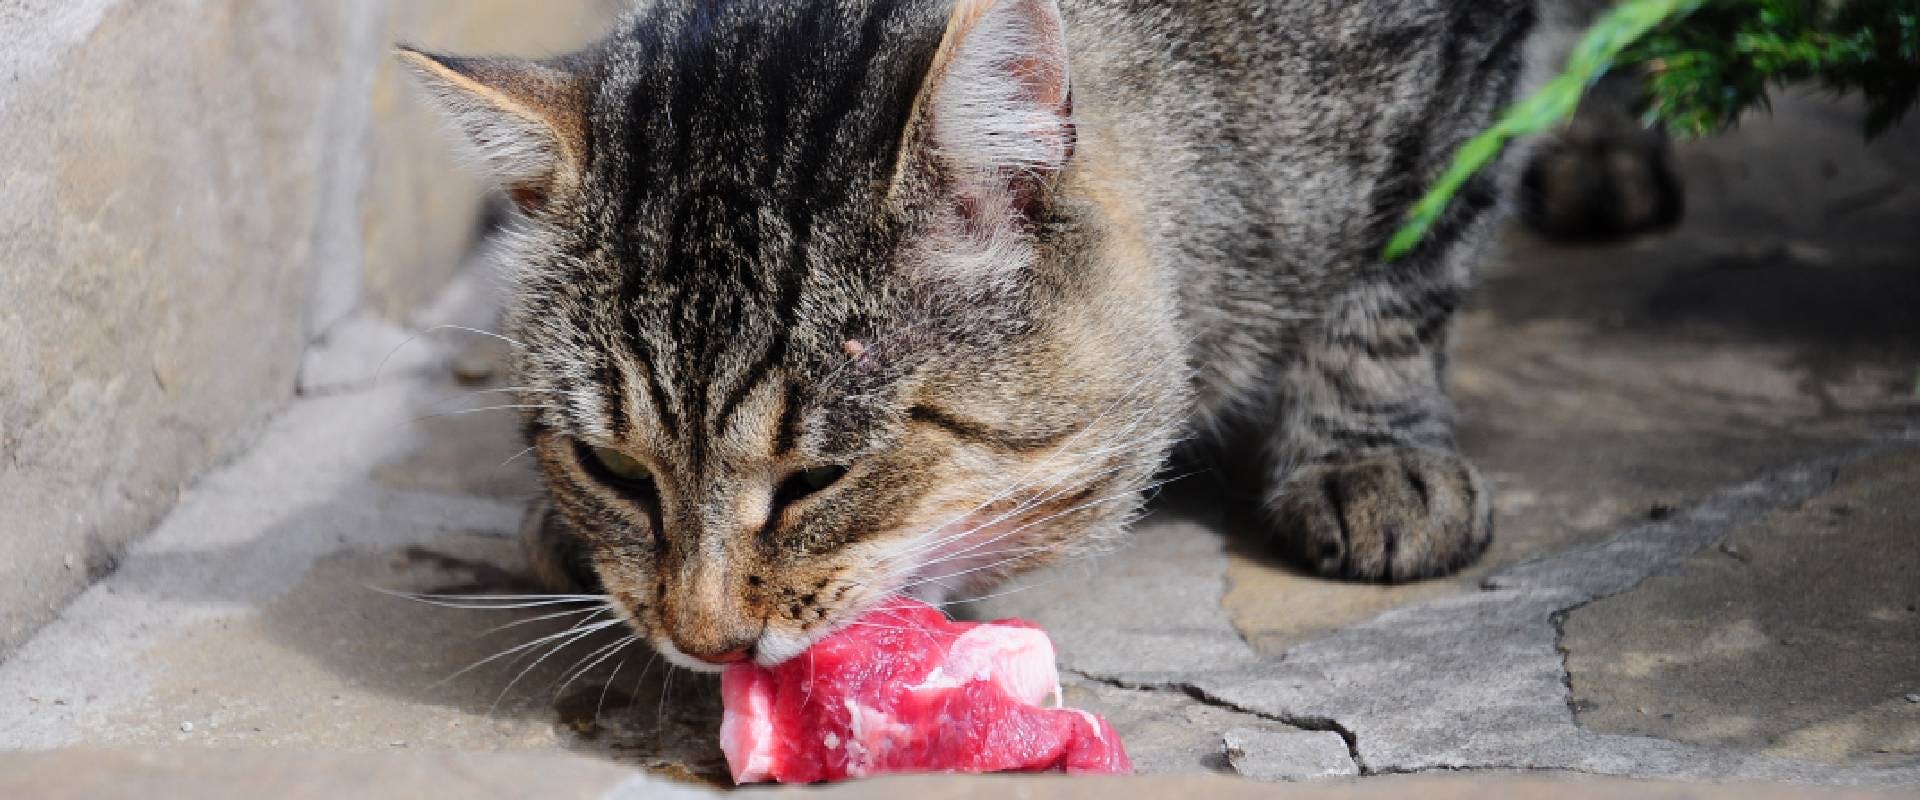 Cat eating raw meat